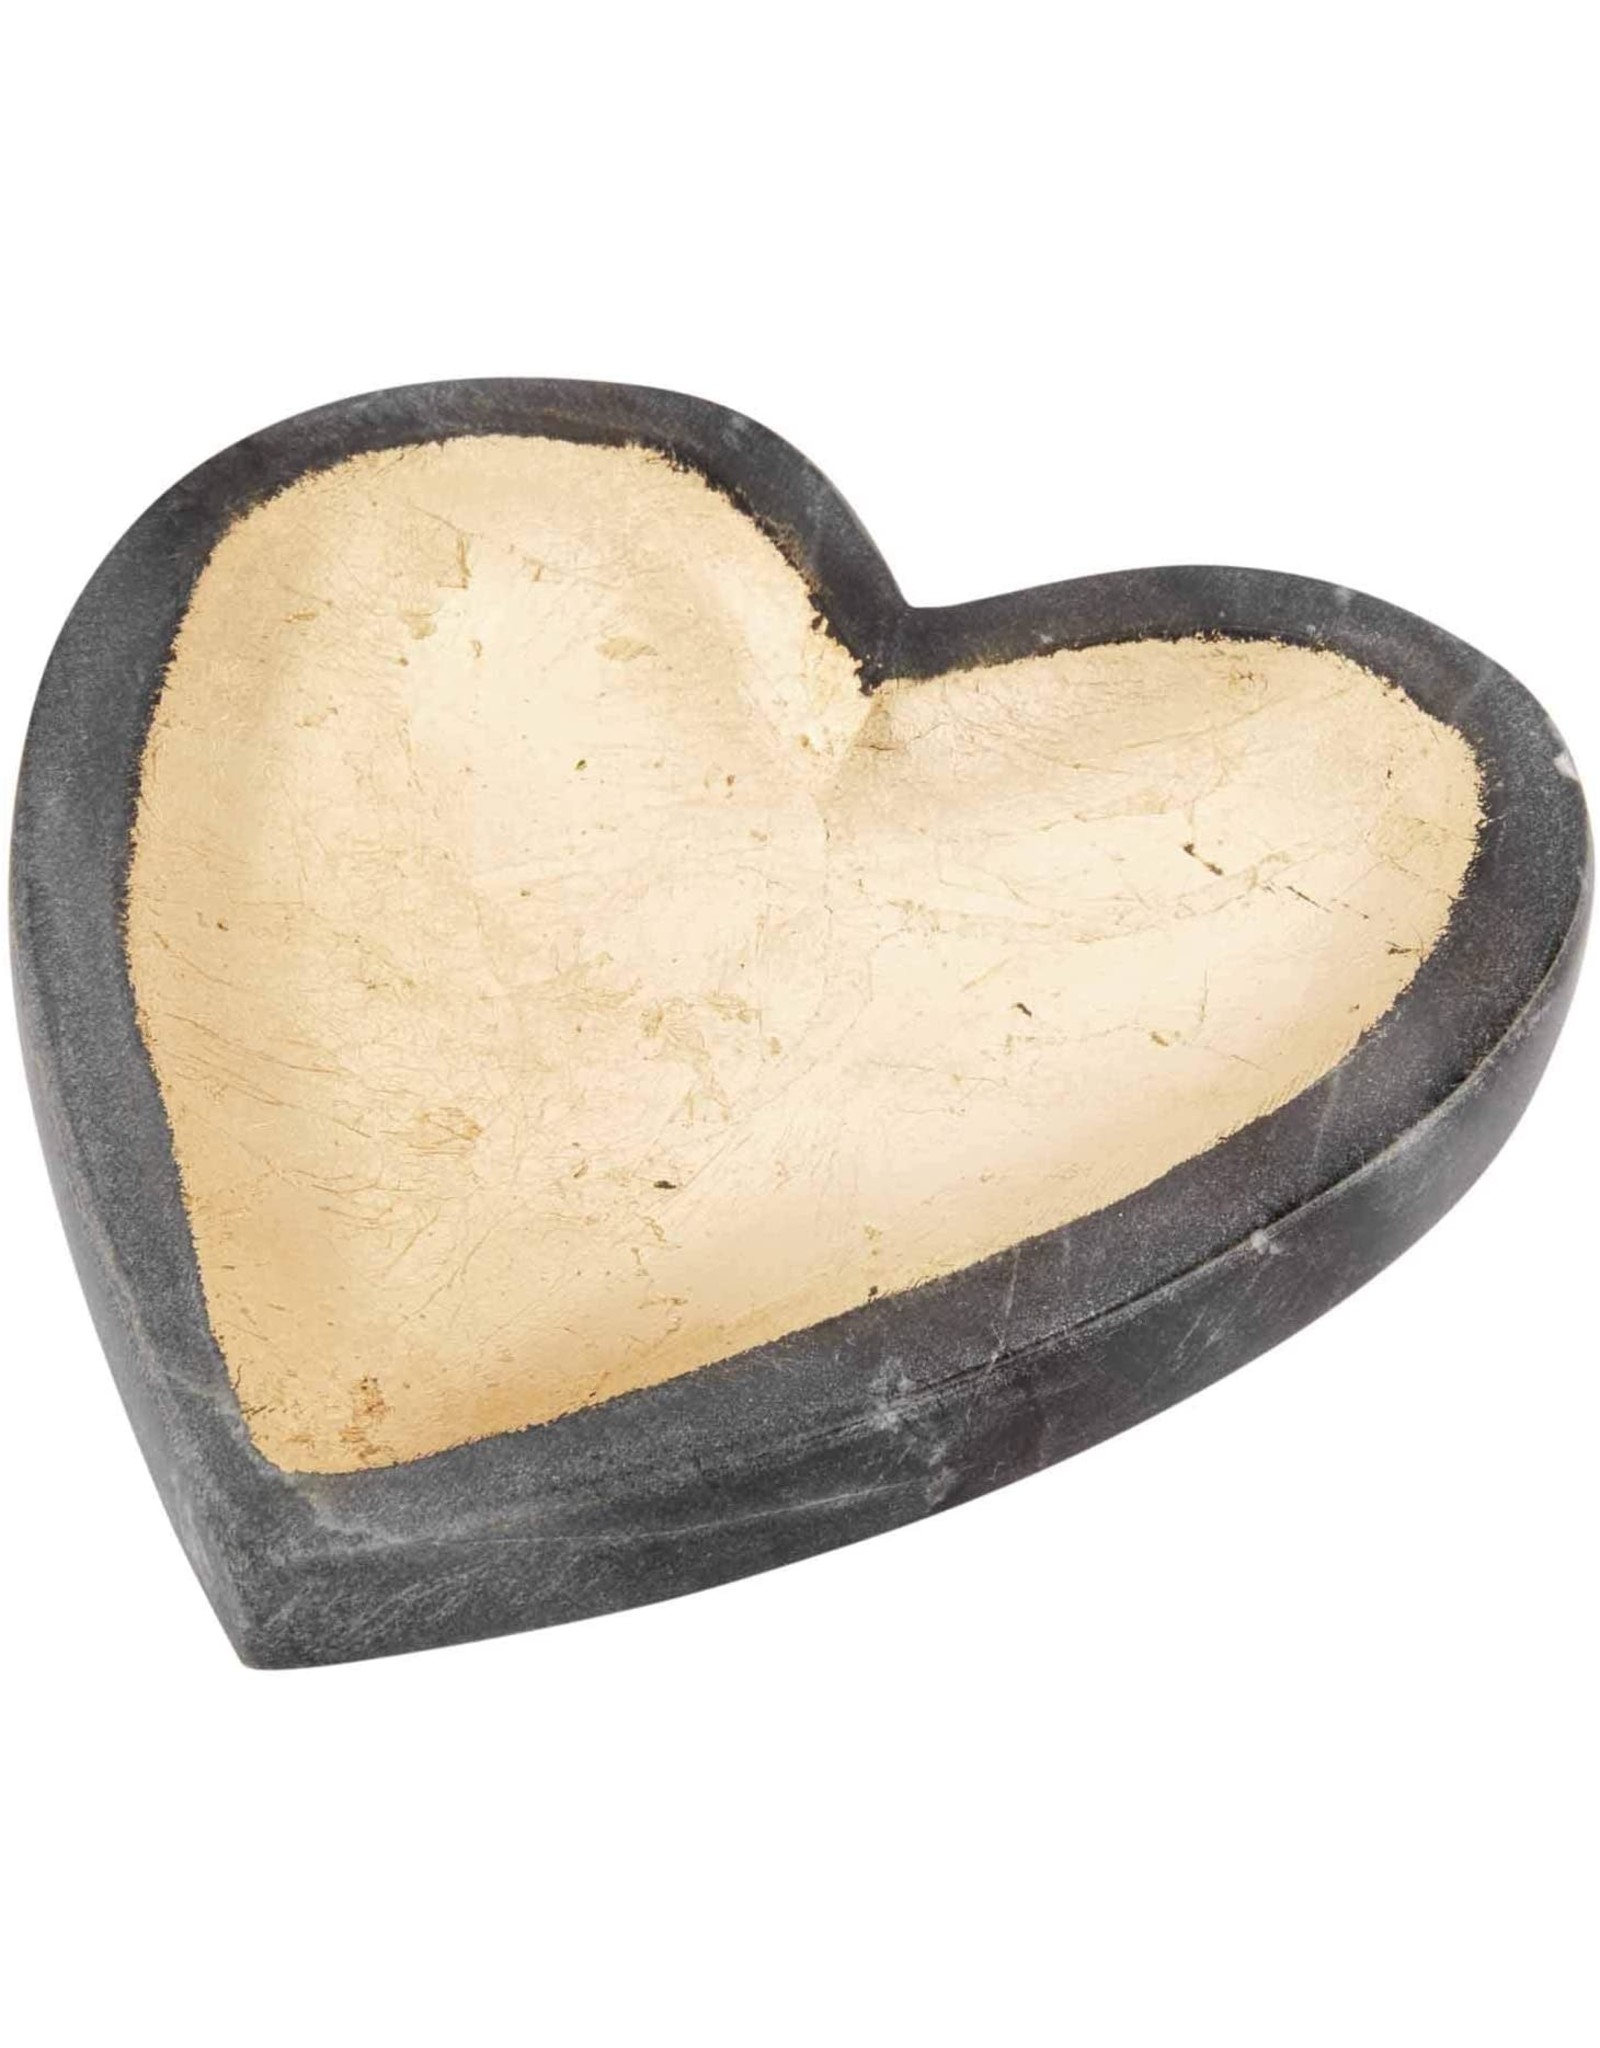 Mud Pie Gray Marble Foil Heart Tray Trinket Ring Dish